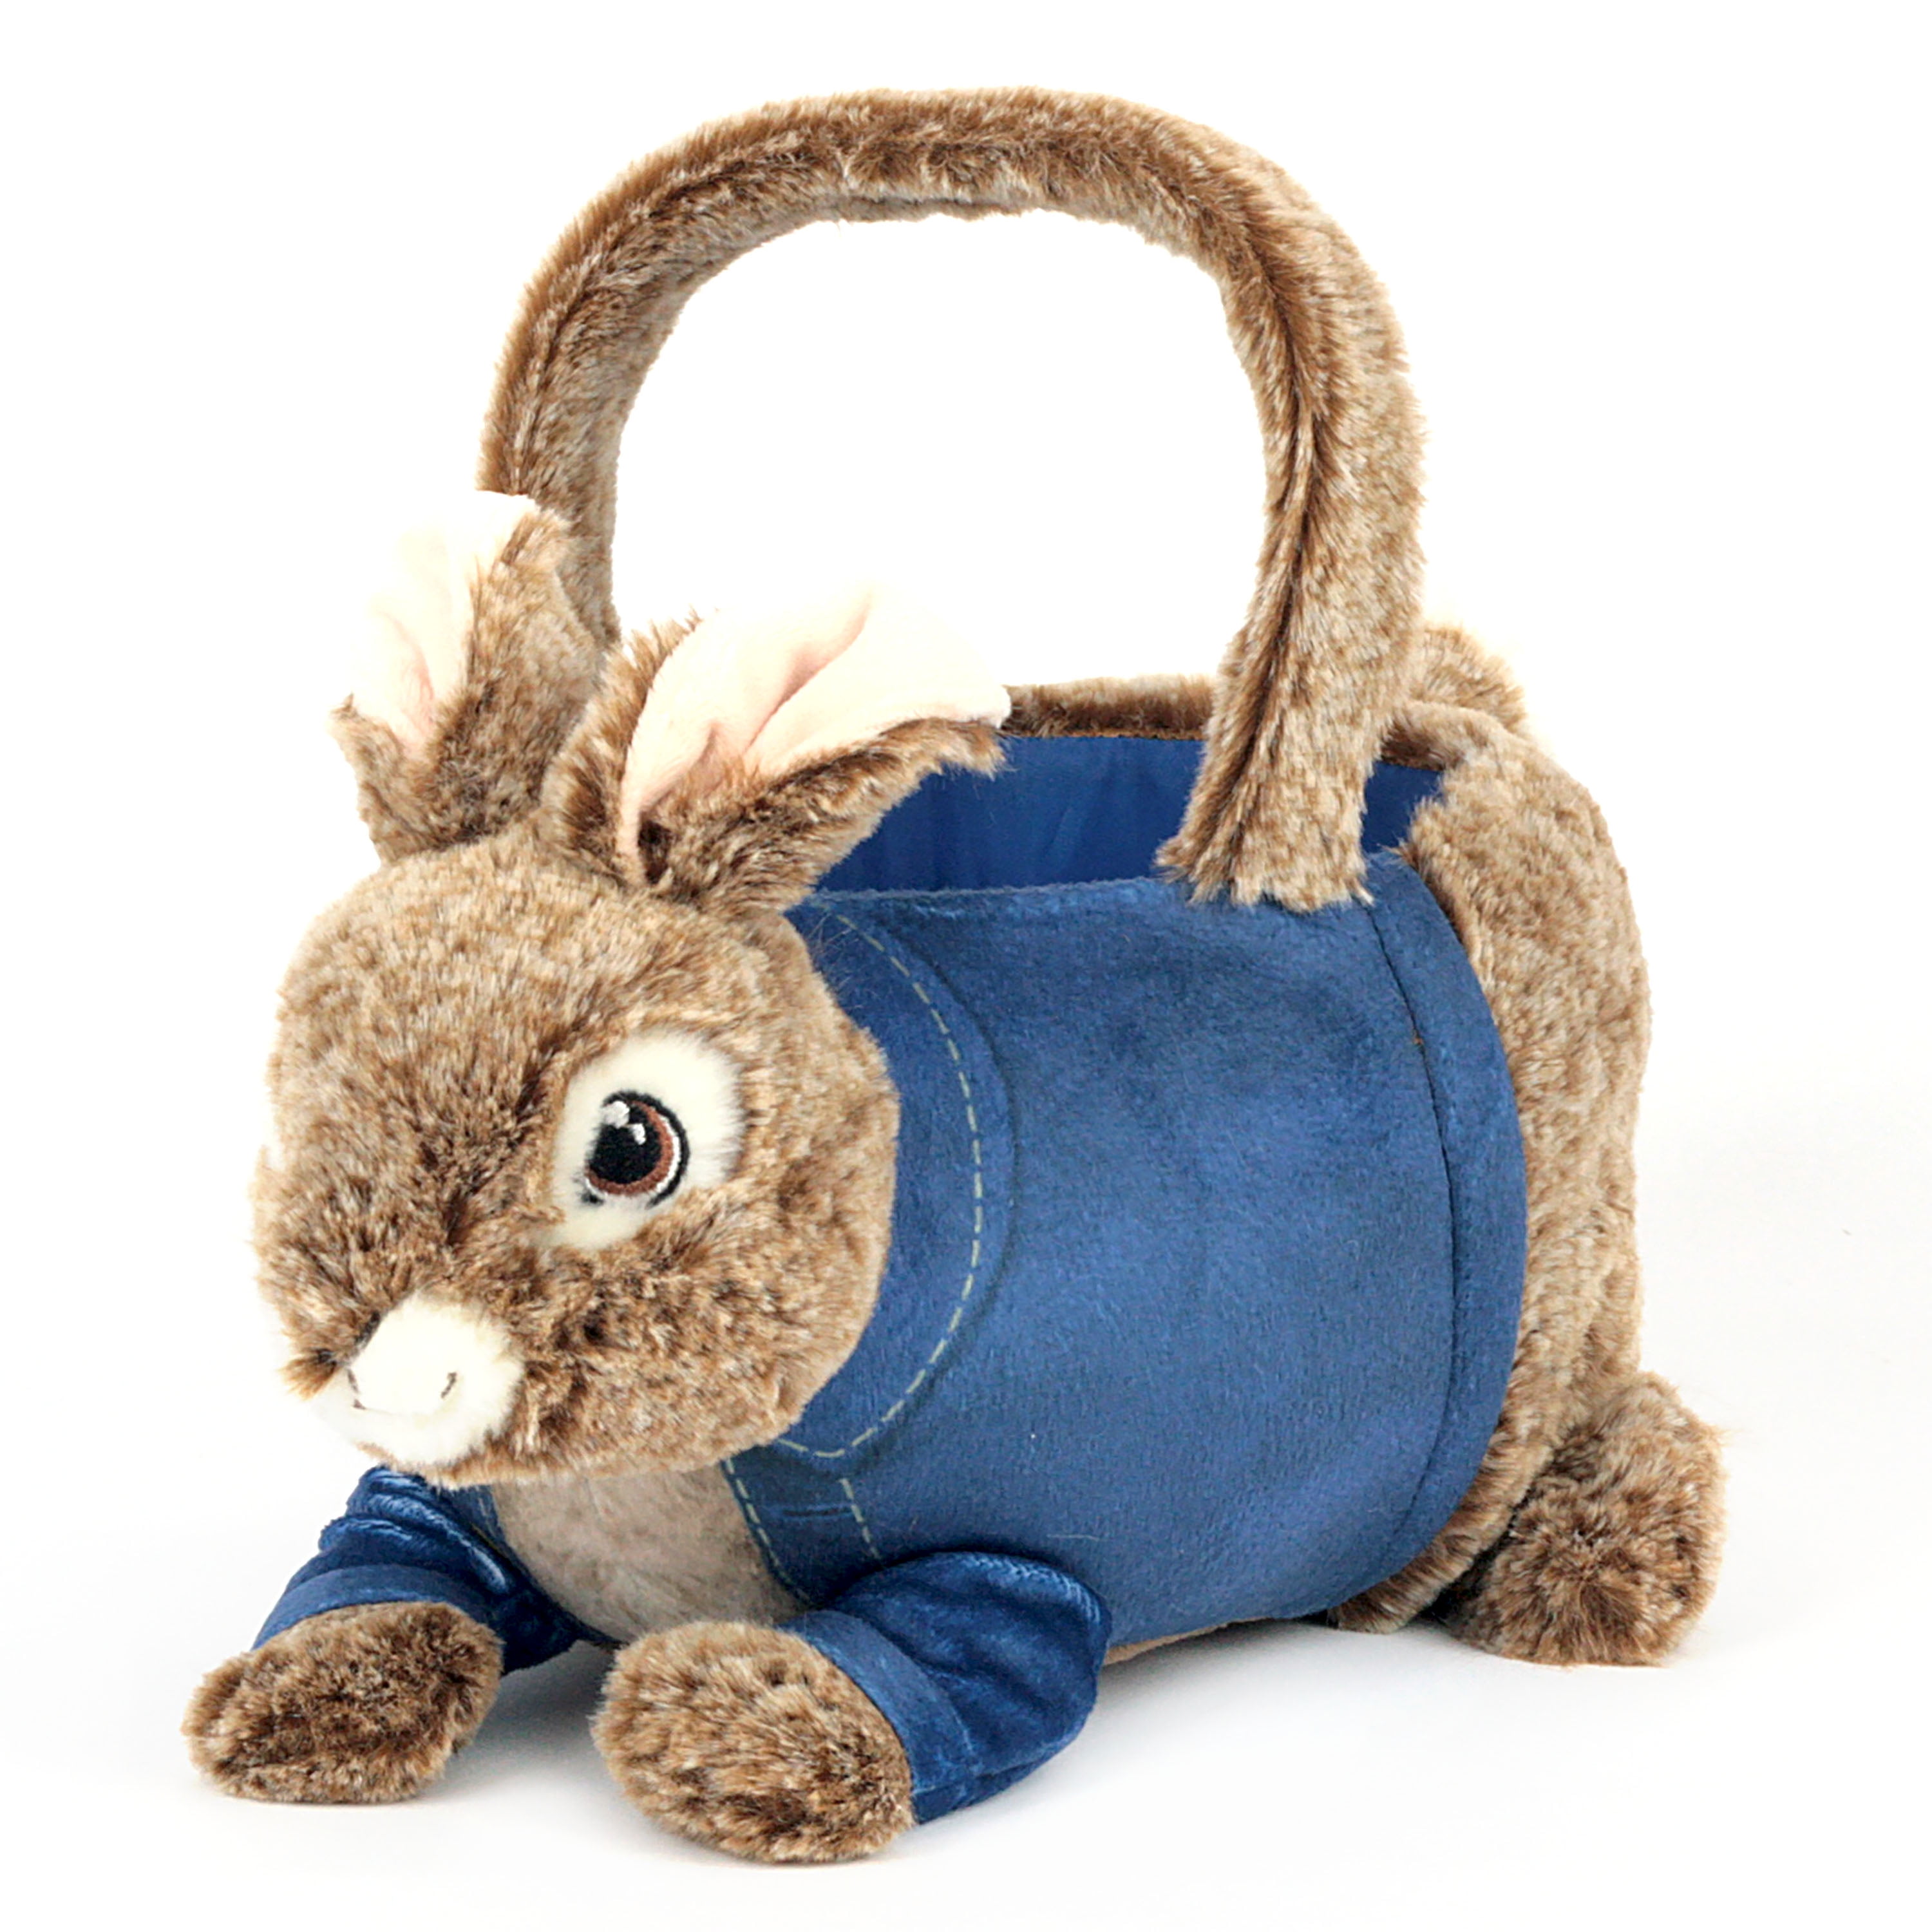 2020 Peter Rabbit 2 Movie Easter Plush Gift Basket About 21in for sale online 